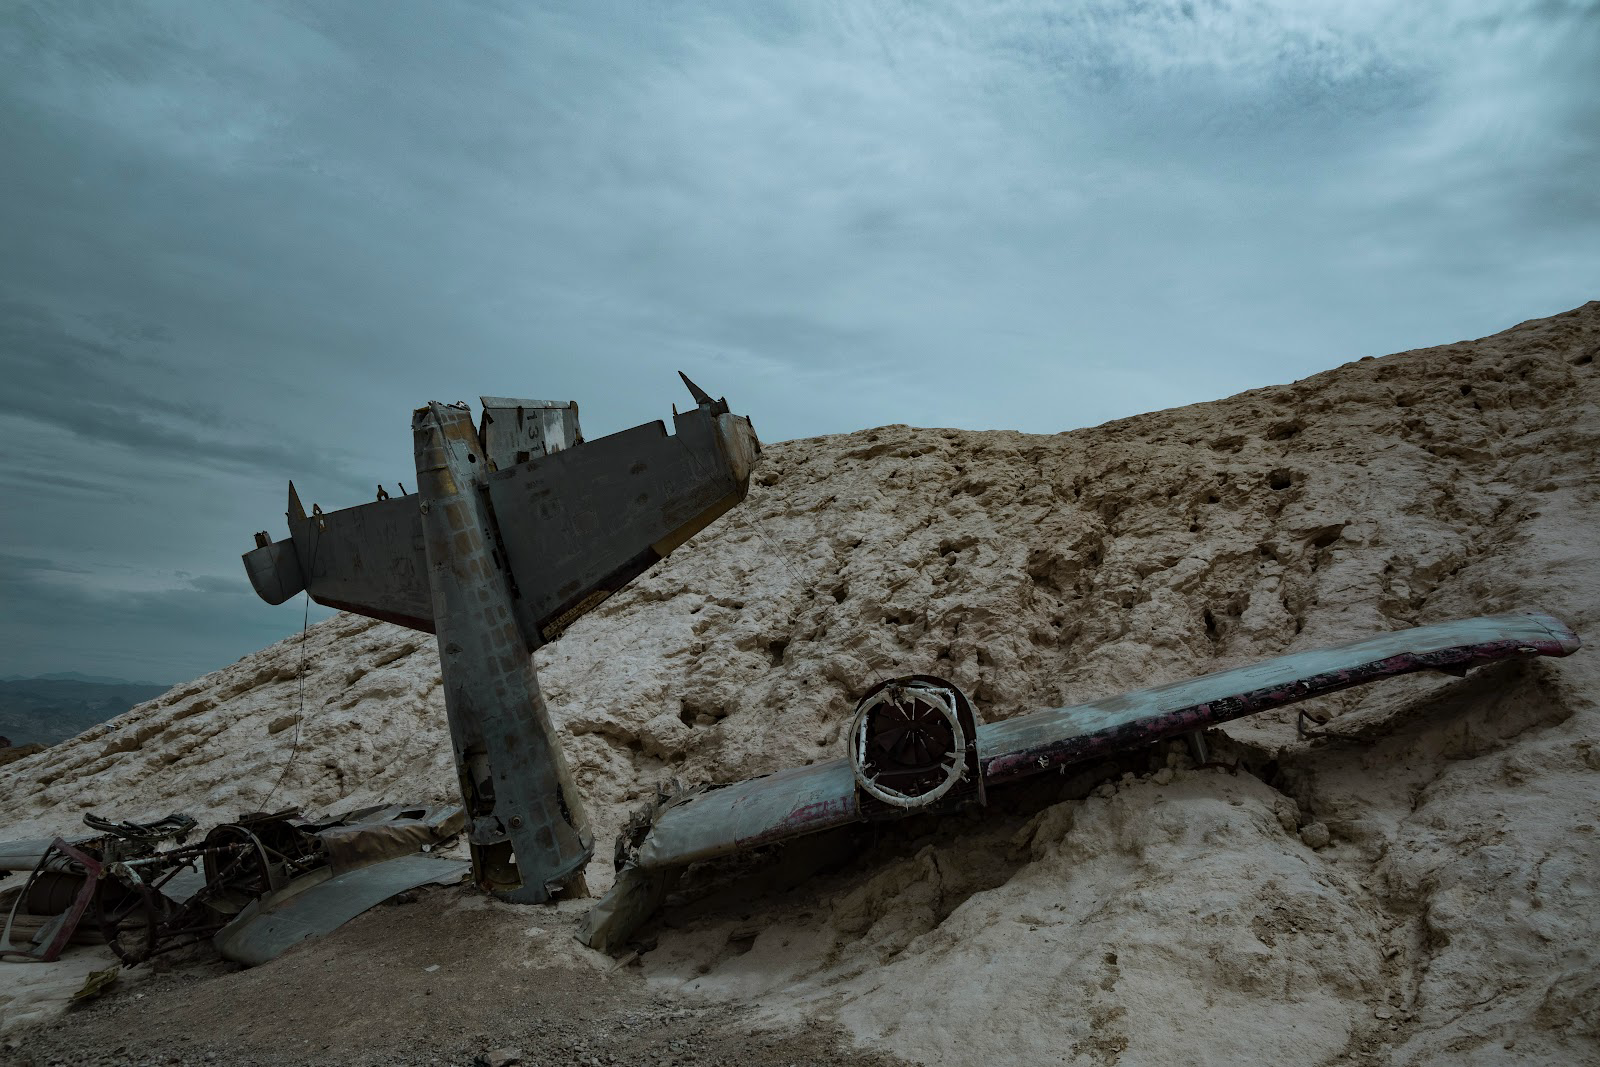 Boneyards are locations that old planes go to retire. Check out the facts and tips for travelers that want to visit.
Pictured: plane parts in a boneyard, the location is gloomy and dry 